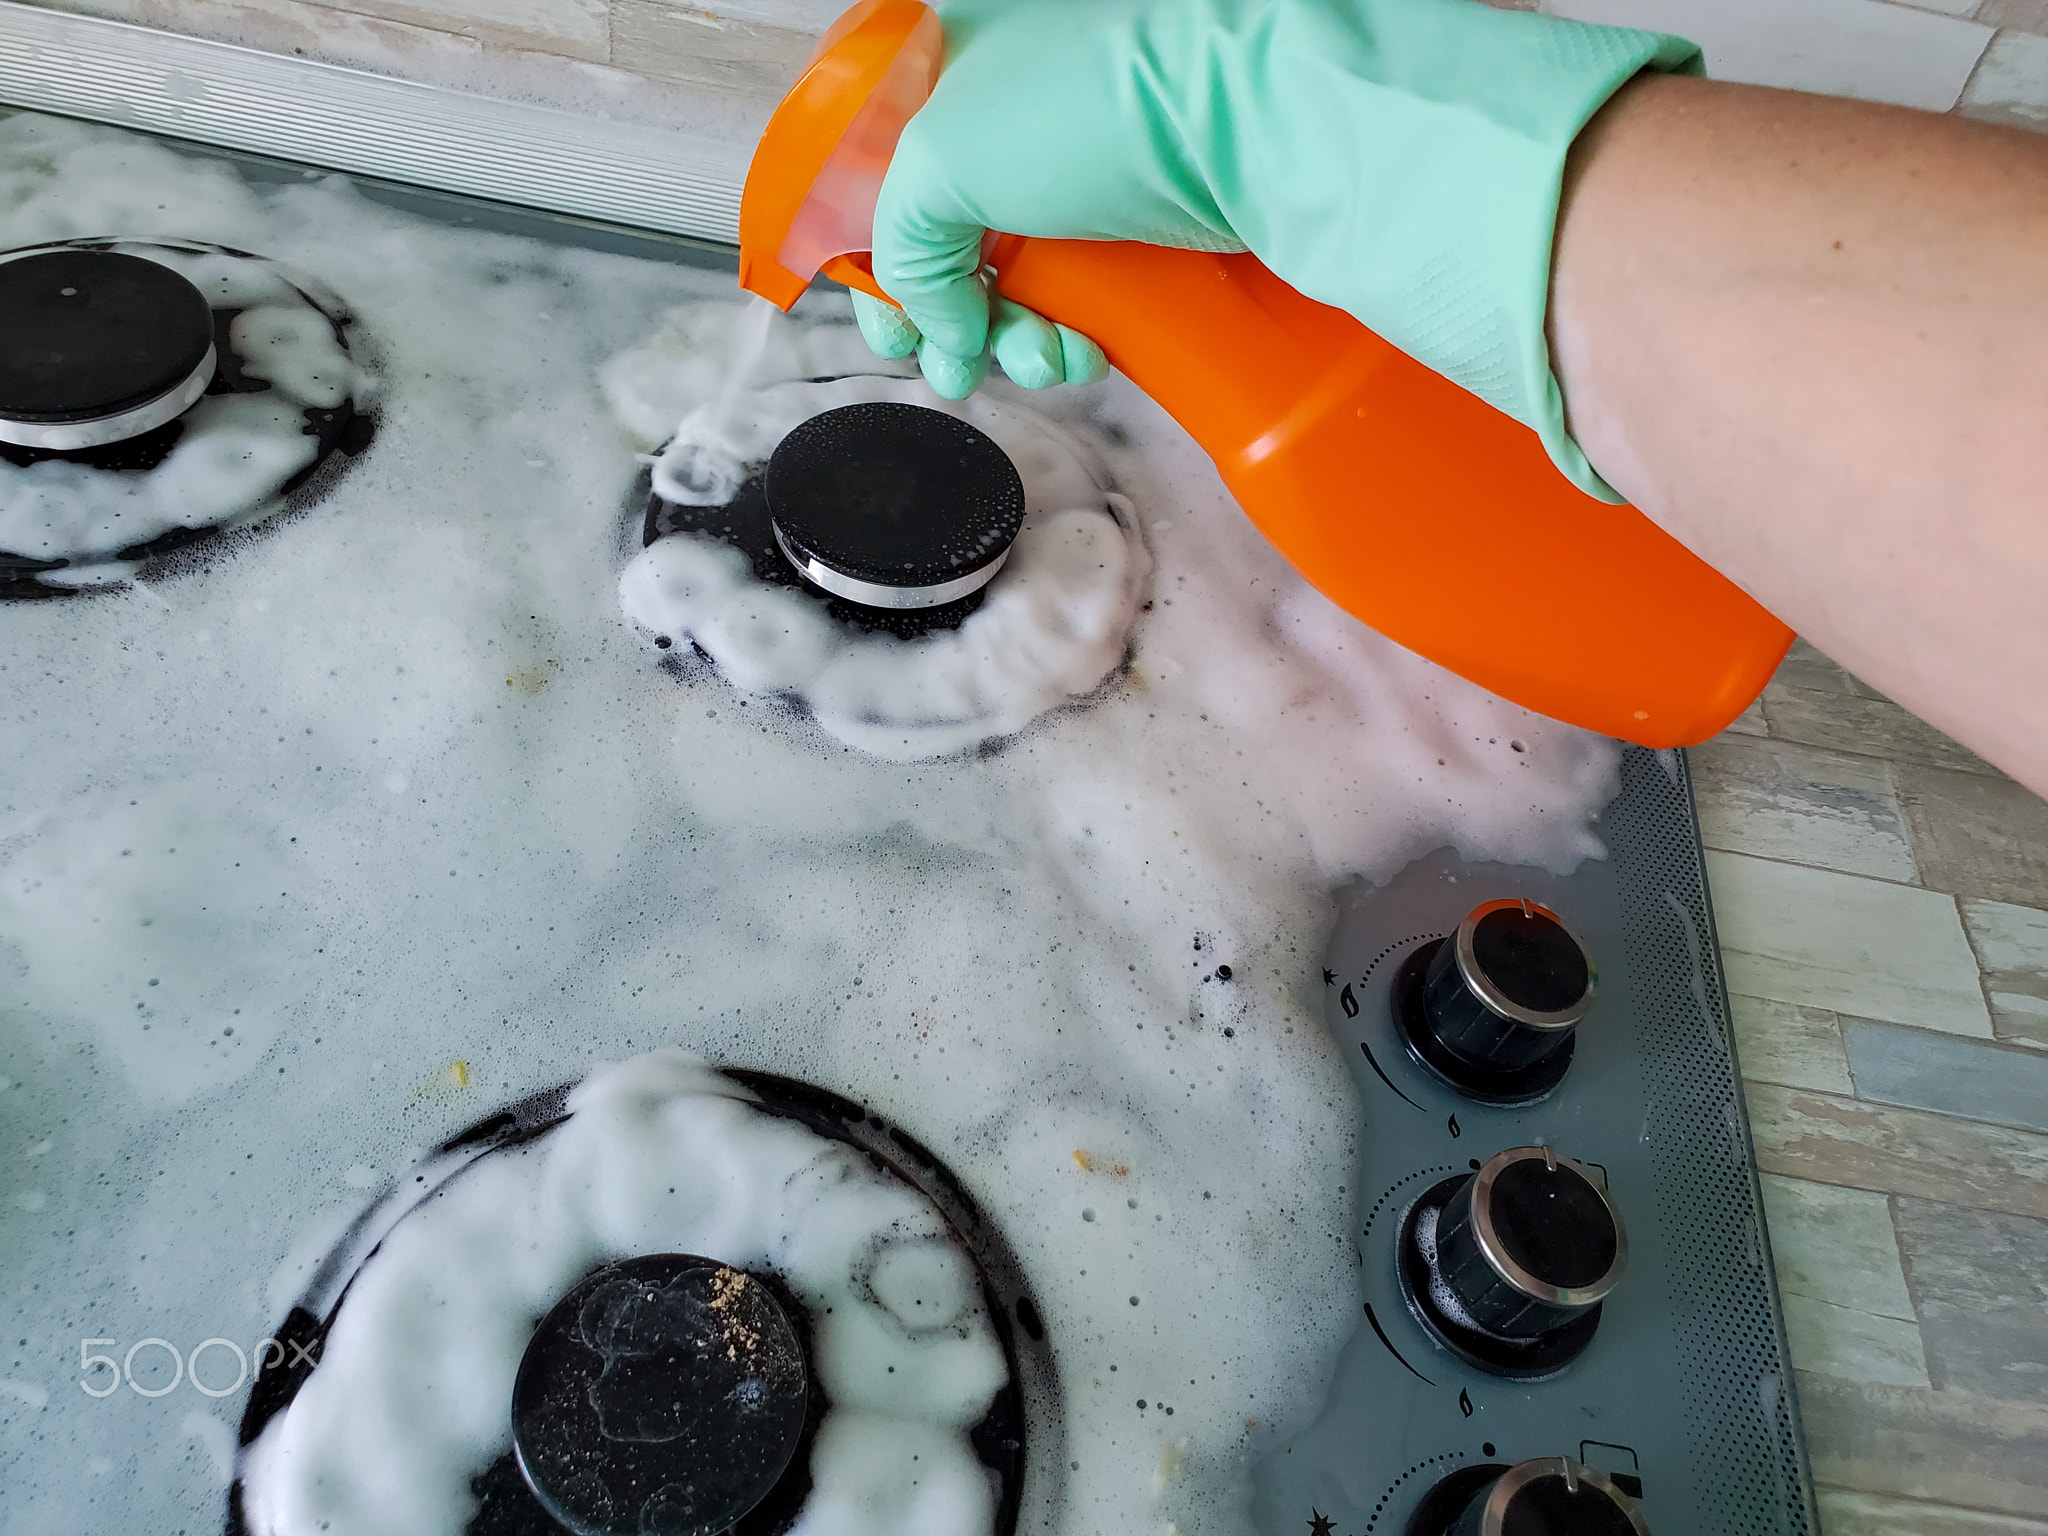 woman in rubber gloves uses a spray to wash a modern gas stove with a